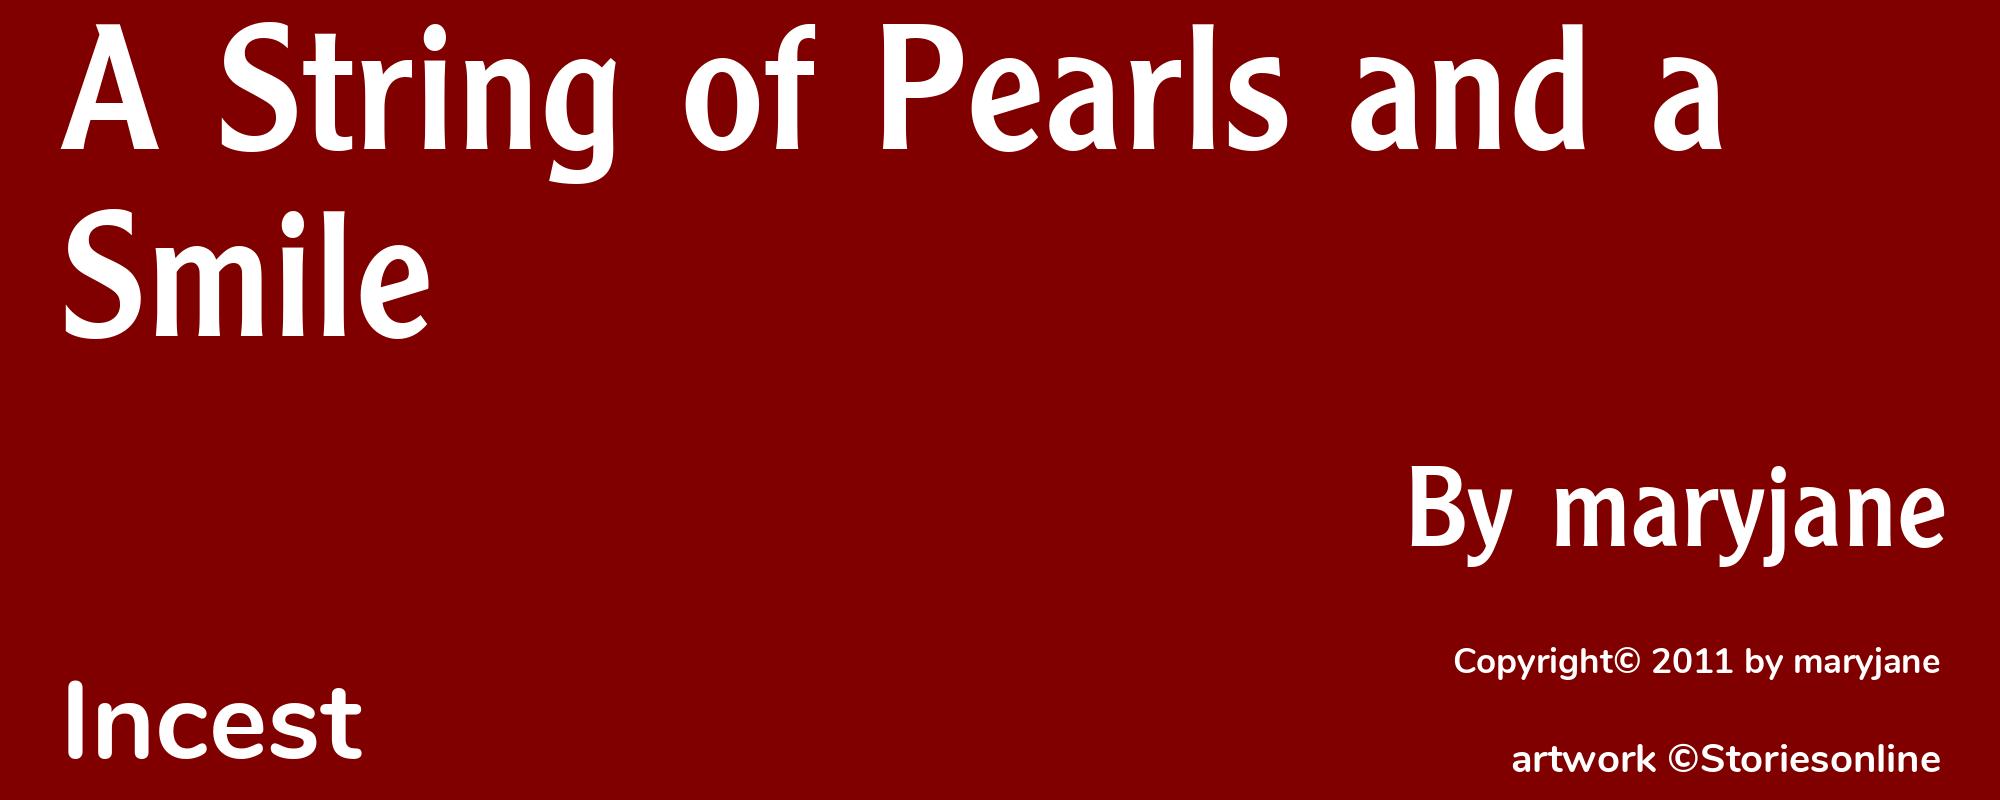 A String of Pearls and a Smile - Cover